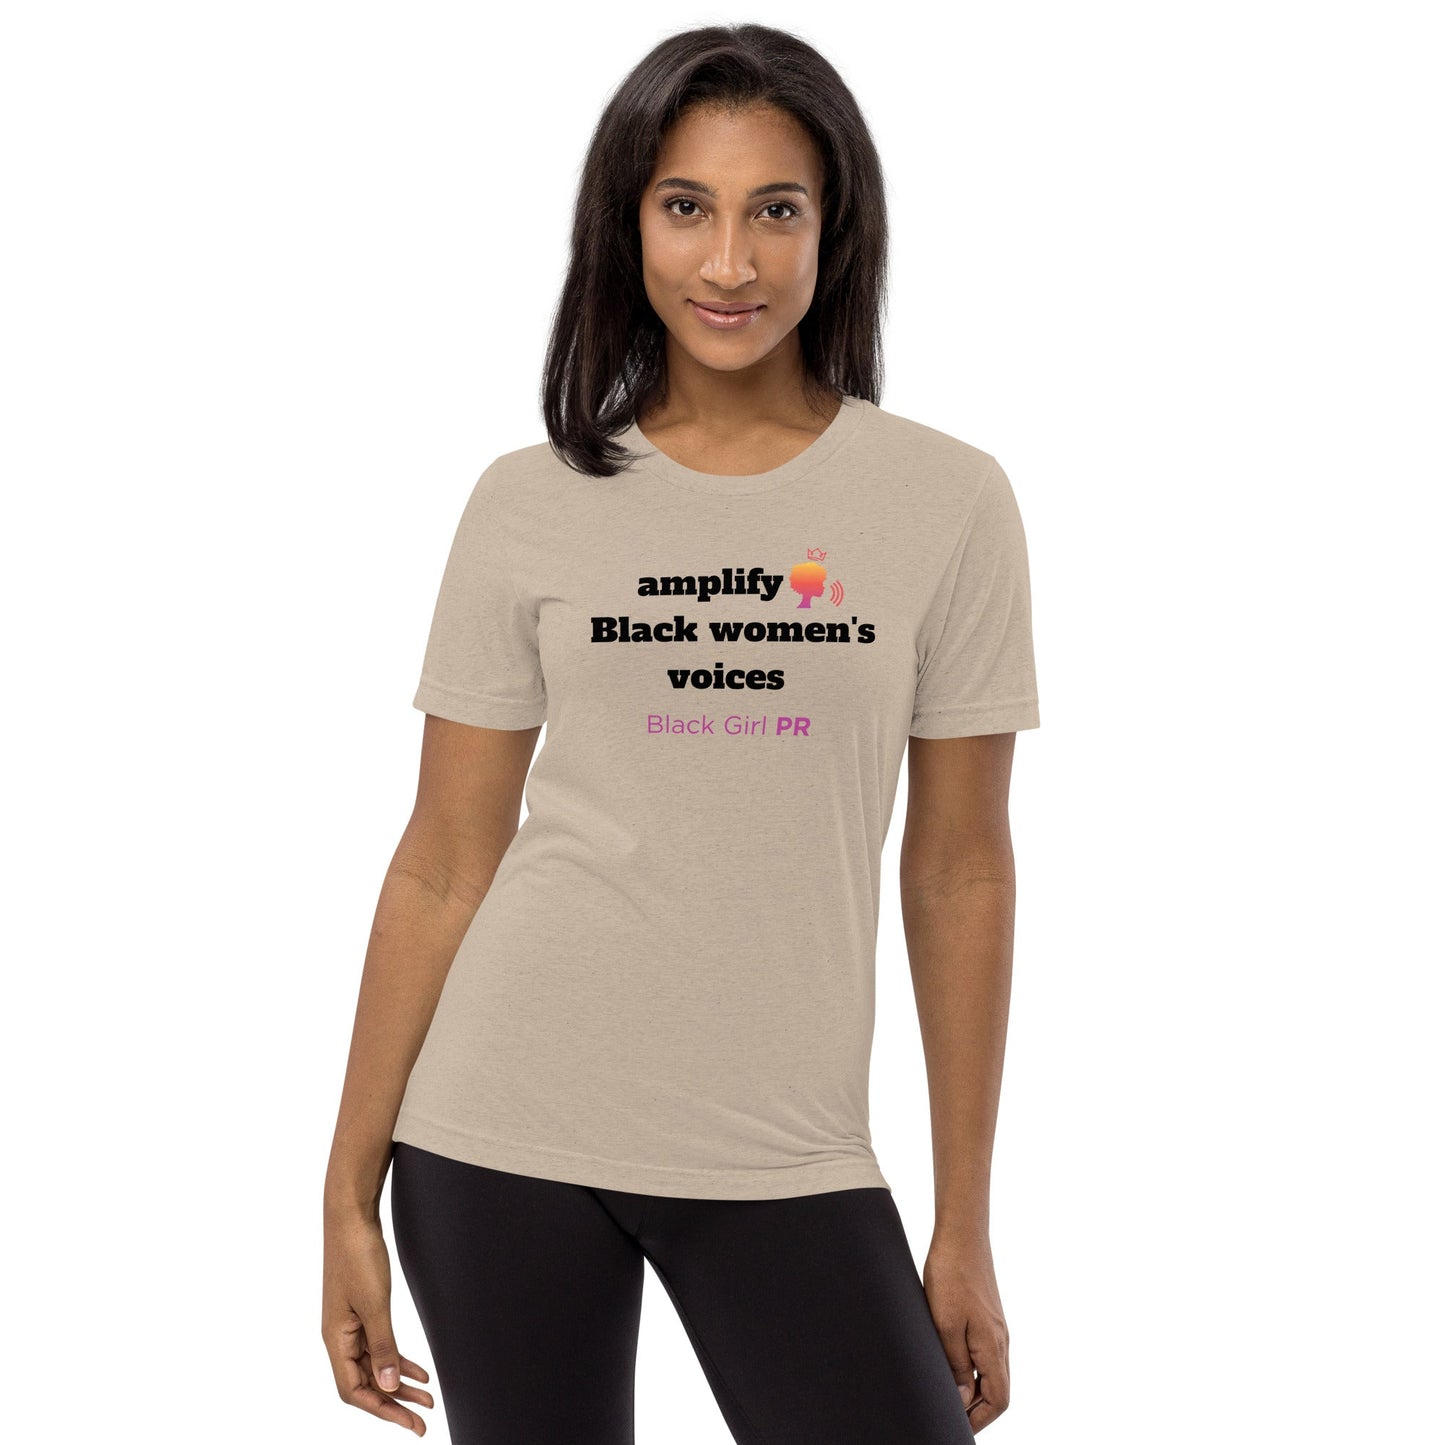 Amplify Black Women's Voices Fitted Short Sleeve T-Shirt - Black Girl PR™